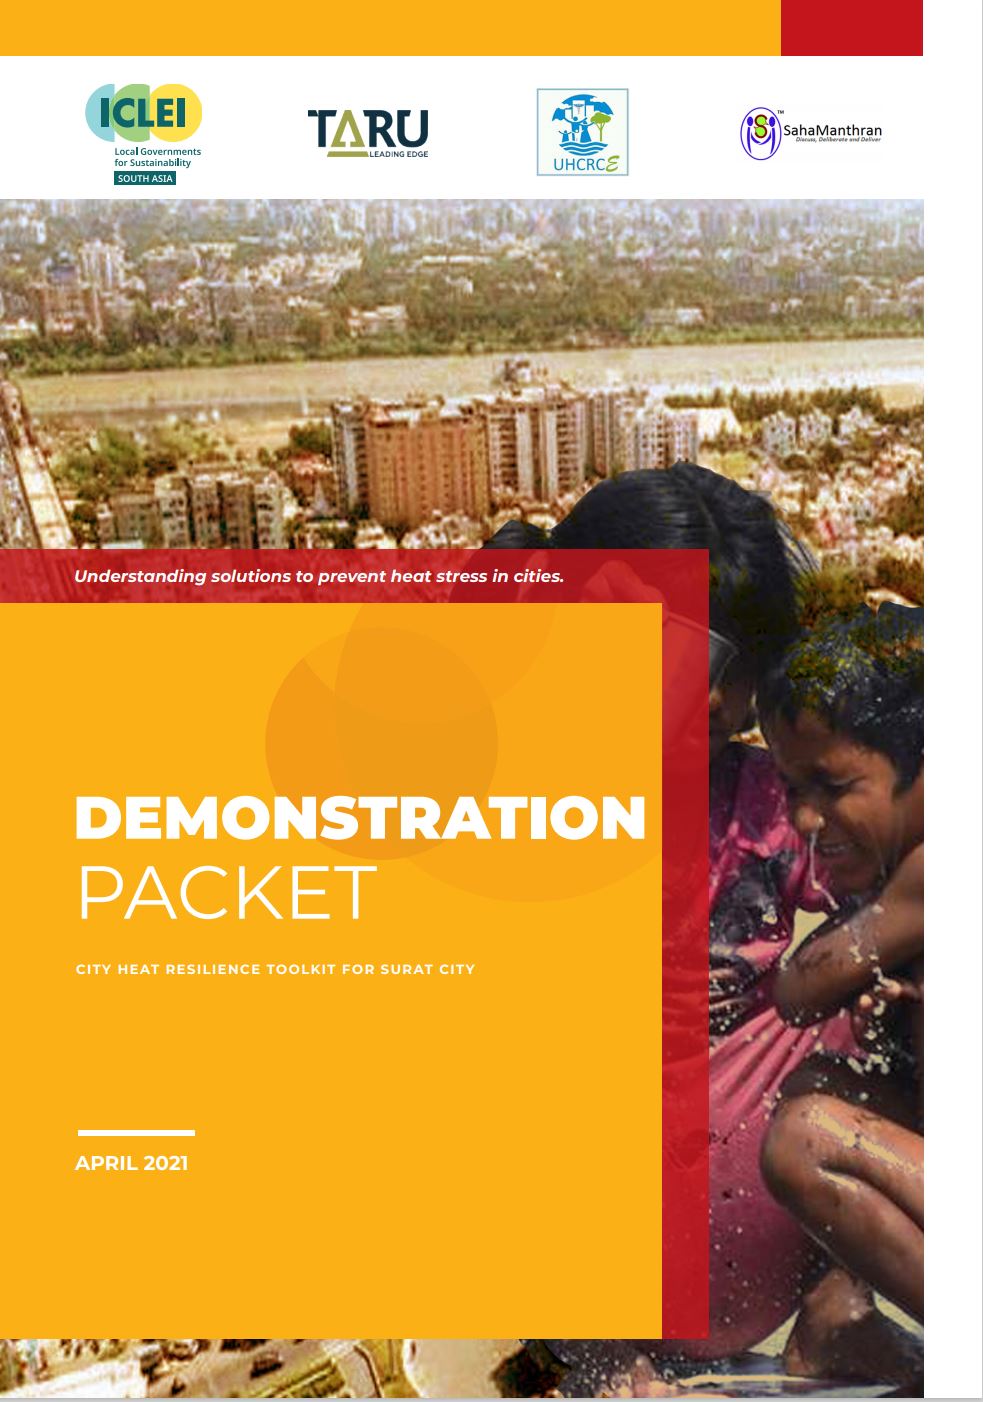 City Heat Resilience Toolkit for Surat City- Demo Packet